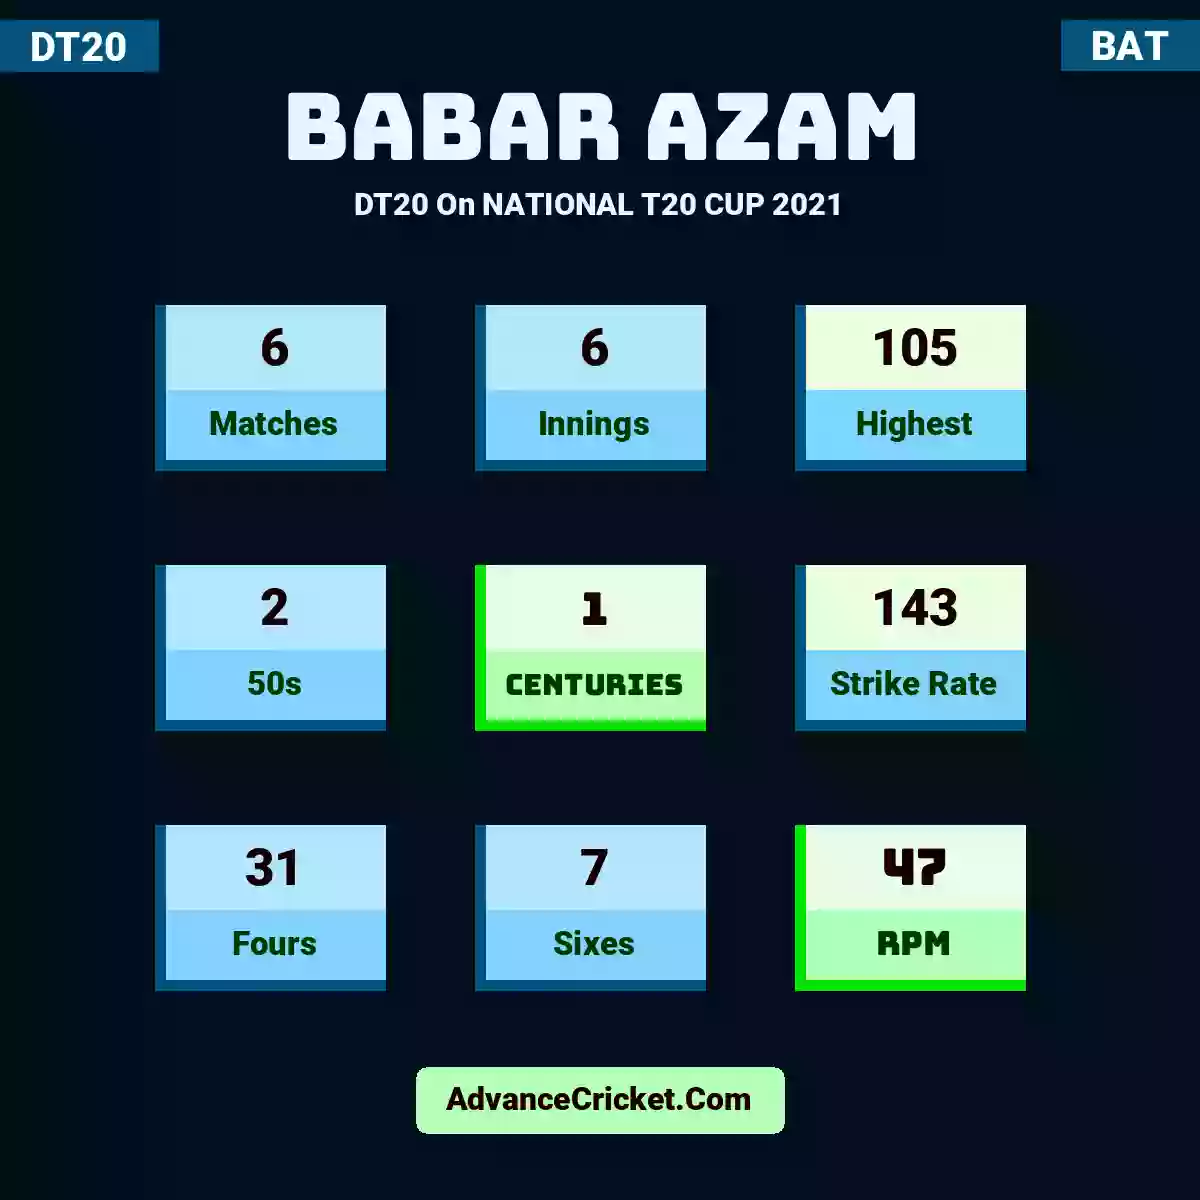 Babar Azam DT20  On NATIONAL T20 CUP 2021, Babar Azam played 6 matches, scored 105 runs as highest, 2 half-centuries, and 1 centuries, with a strike rate of 143. B.Azam hit 31 fours and 7 sixes, with an RPM of 47.